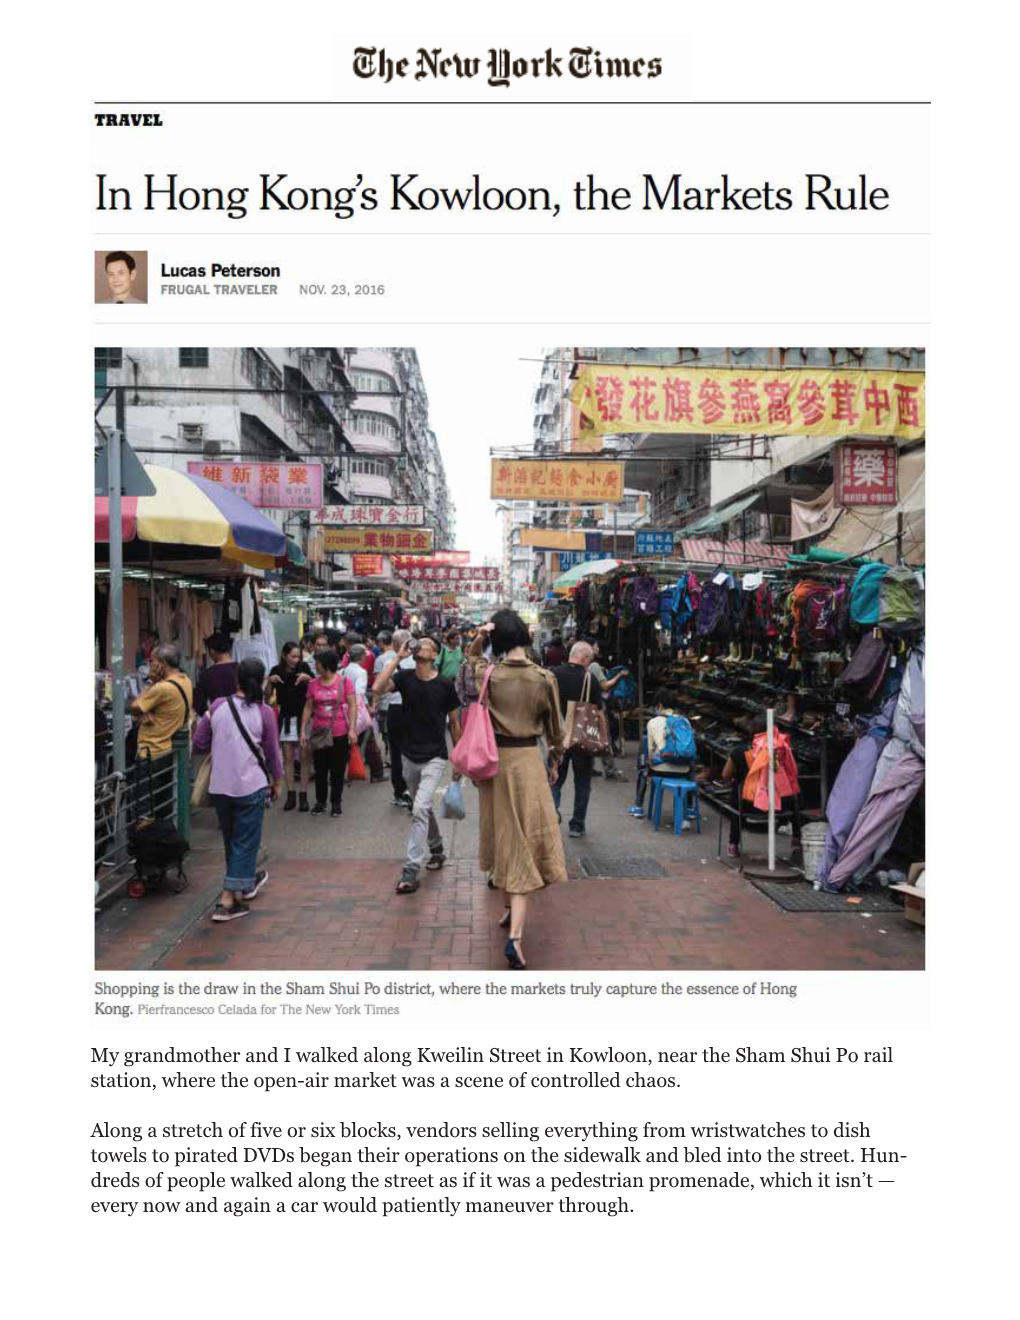 My Grandmother and I Walked Along Kweilin Street in Kowloon, Near the Sham Shui Po Rail Station, Where the Open-Air Market Was a Scene of Controlled Chaos